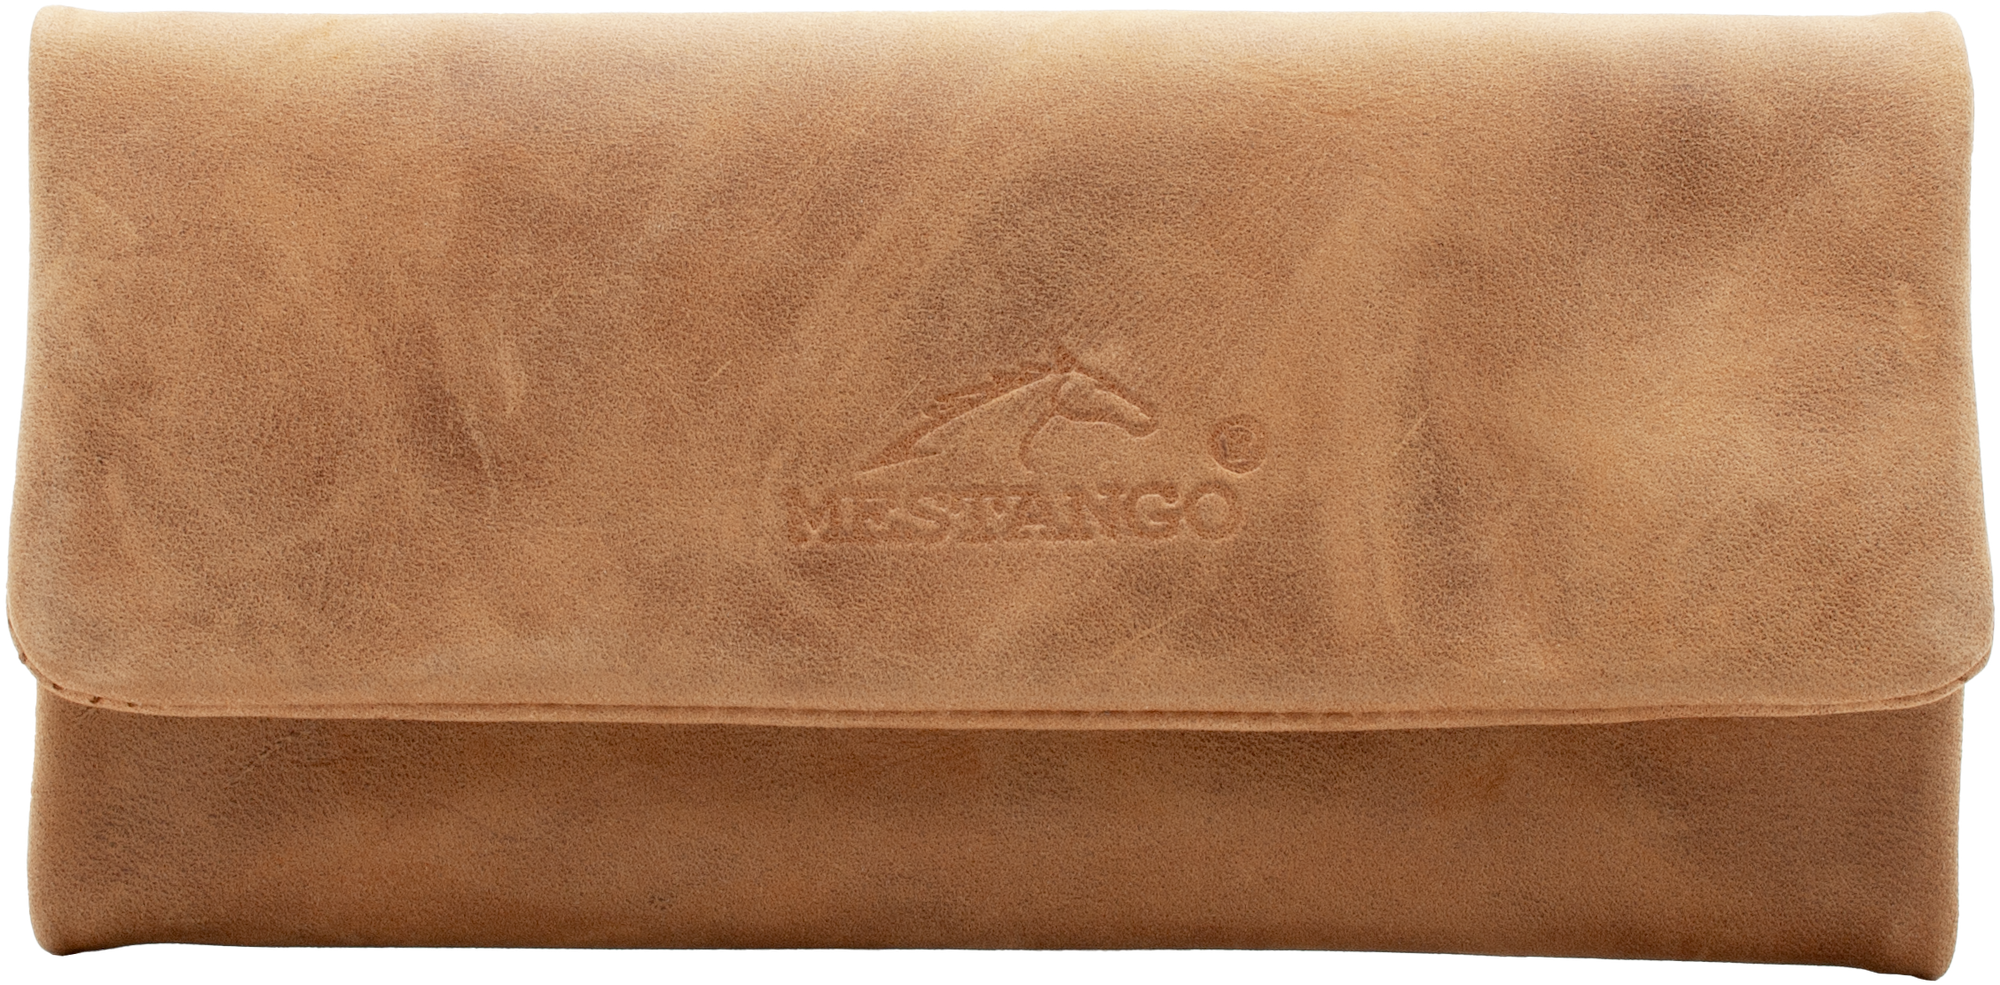 Mestango 2015-3 Roll Your Own Pouch